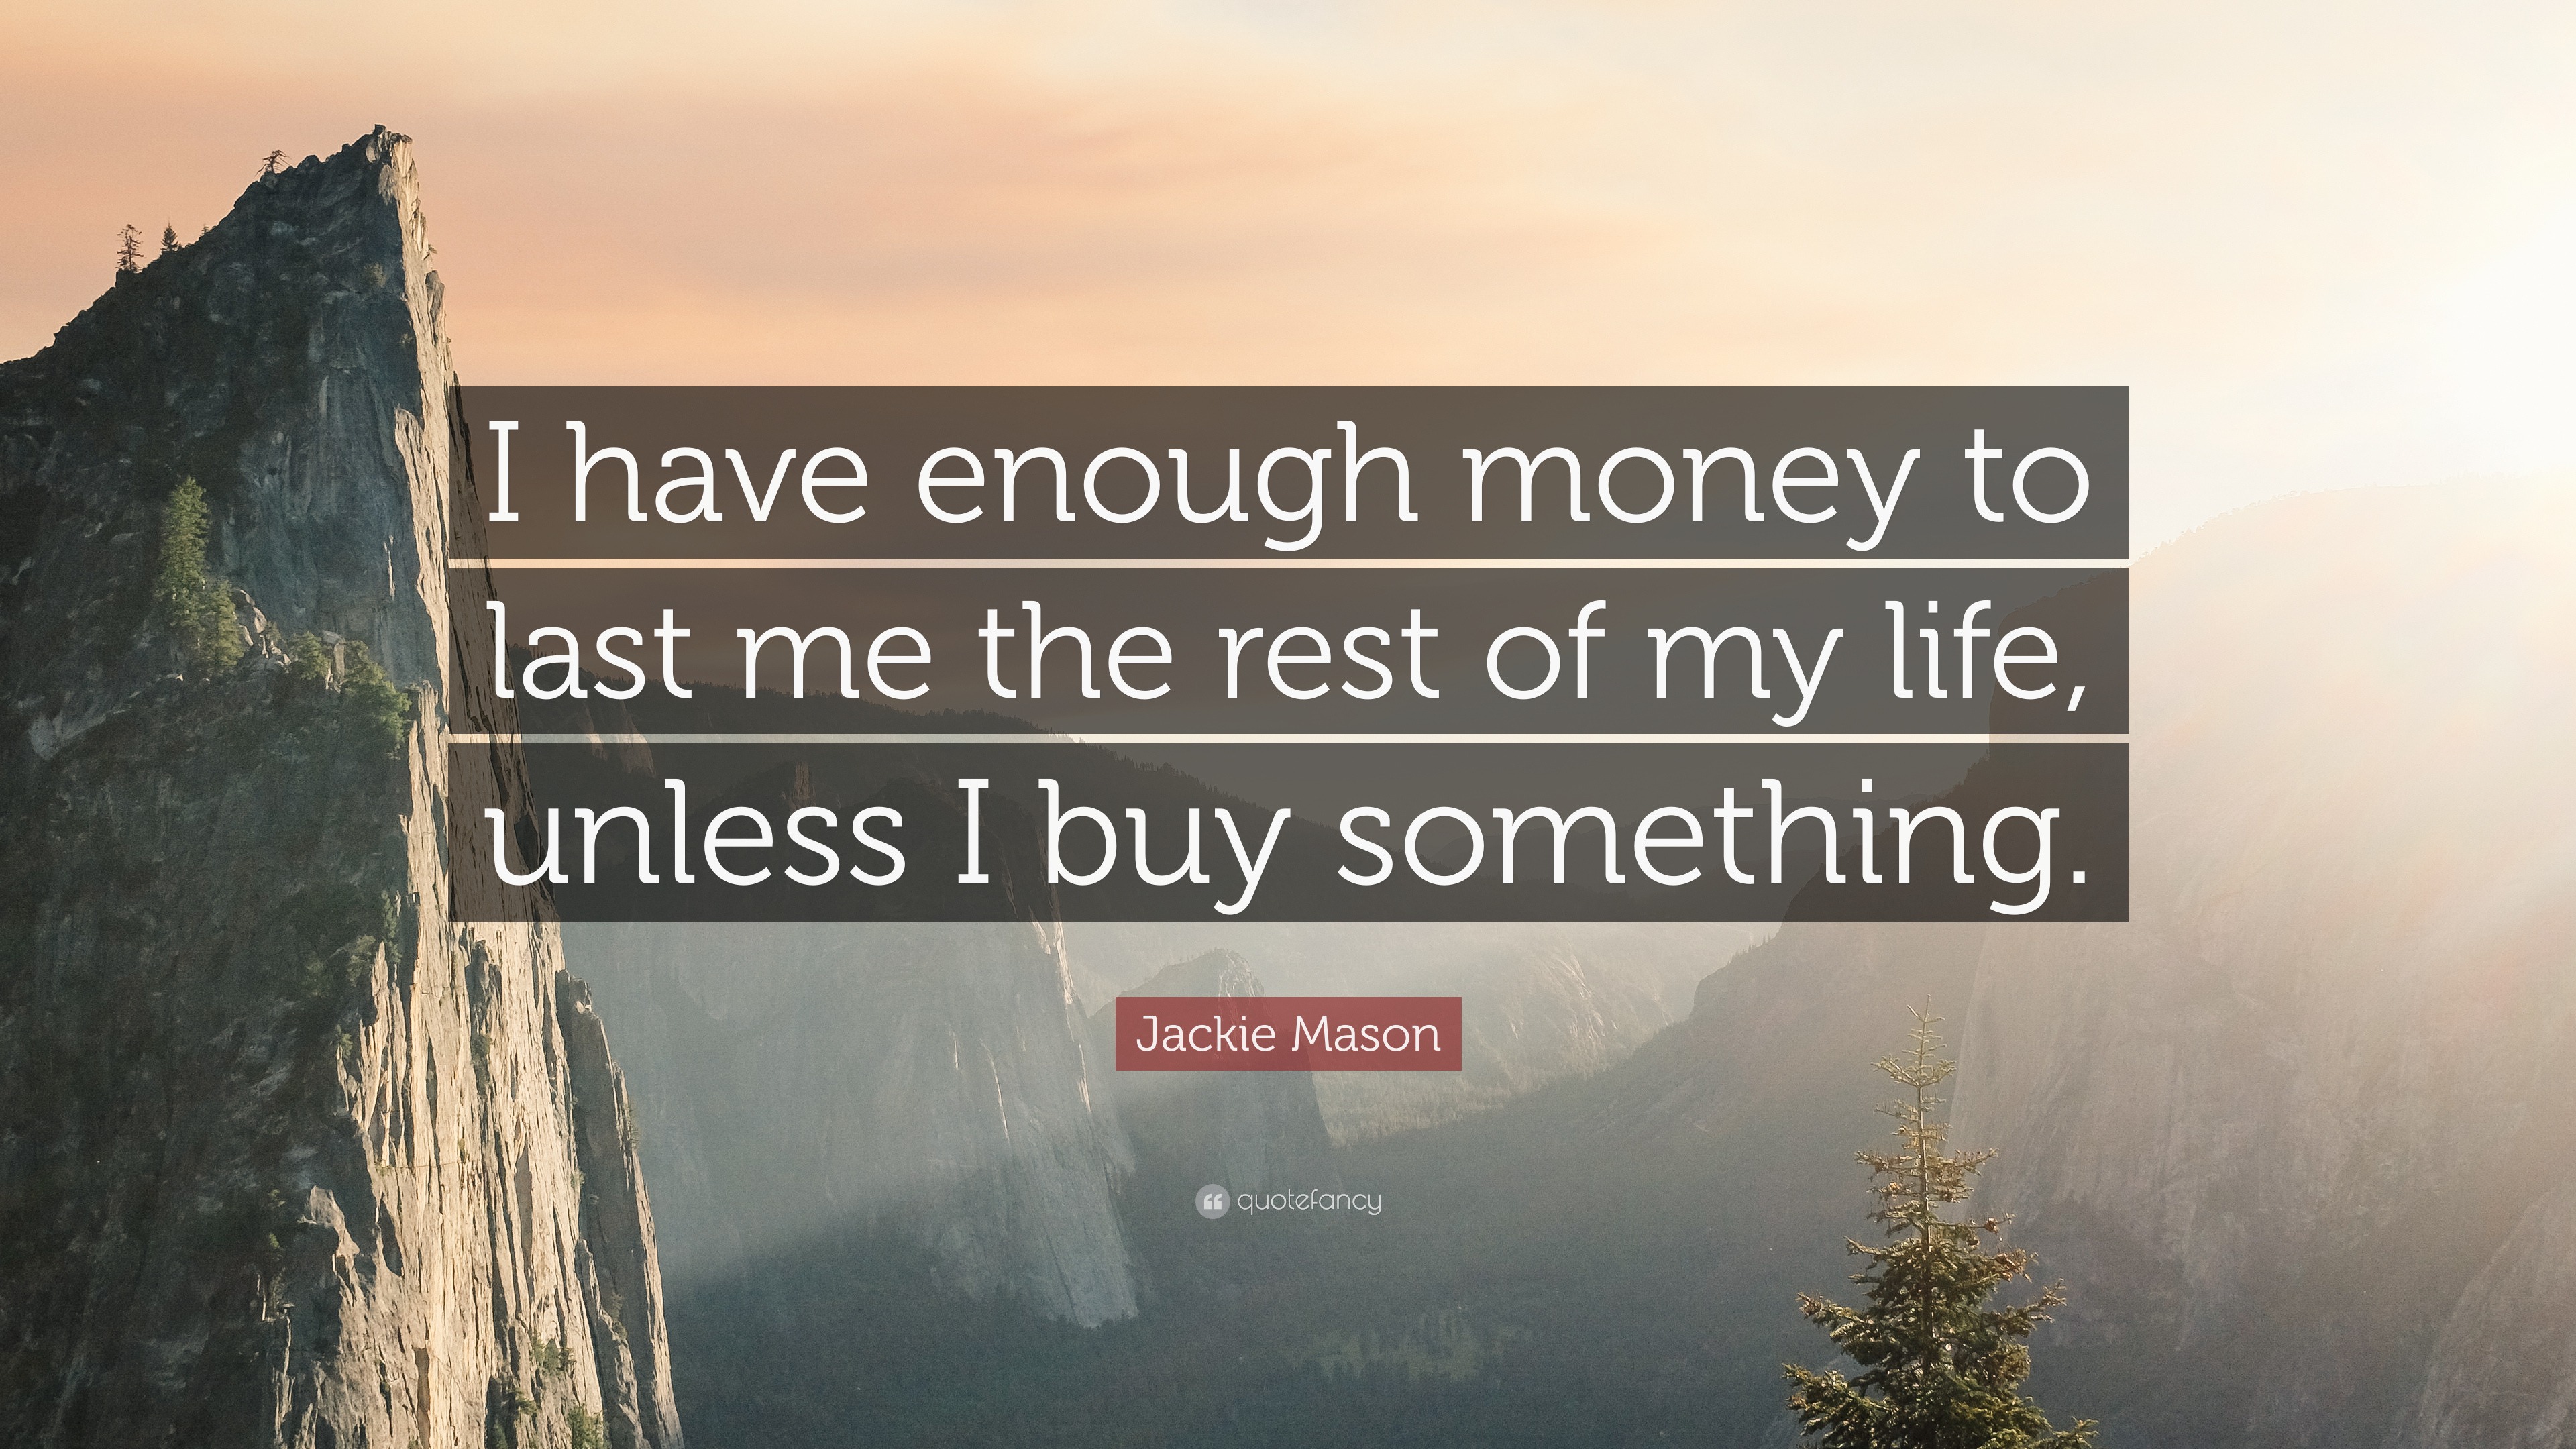 jackie-mason-quote-i-have-enough-money-to-last-me-the-rest-of-my-life